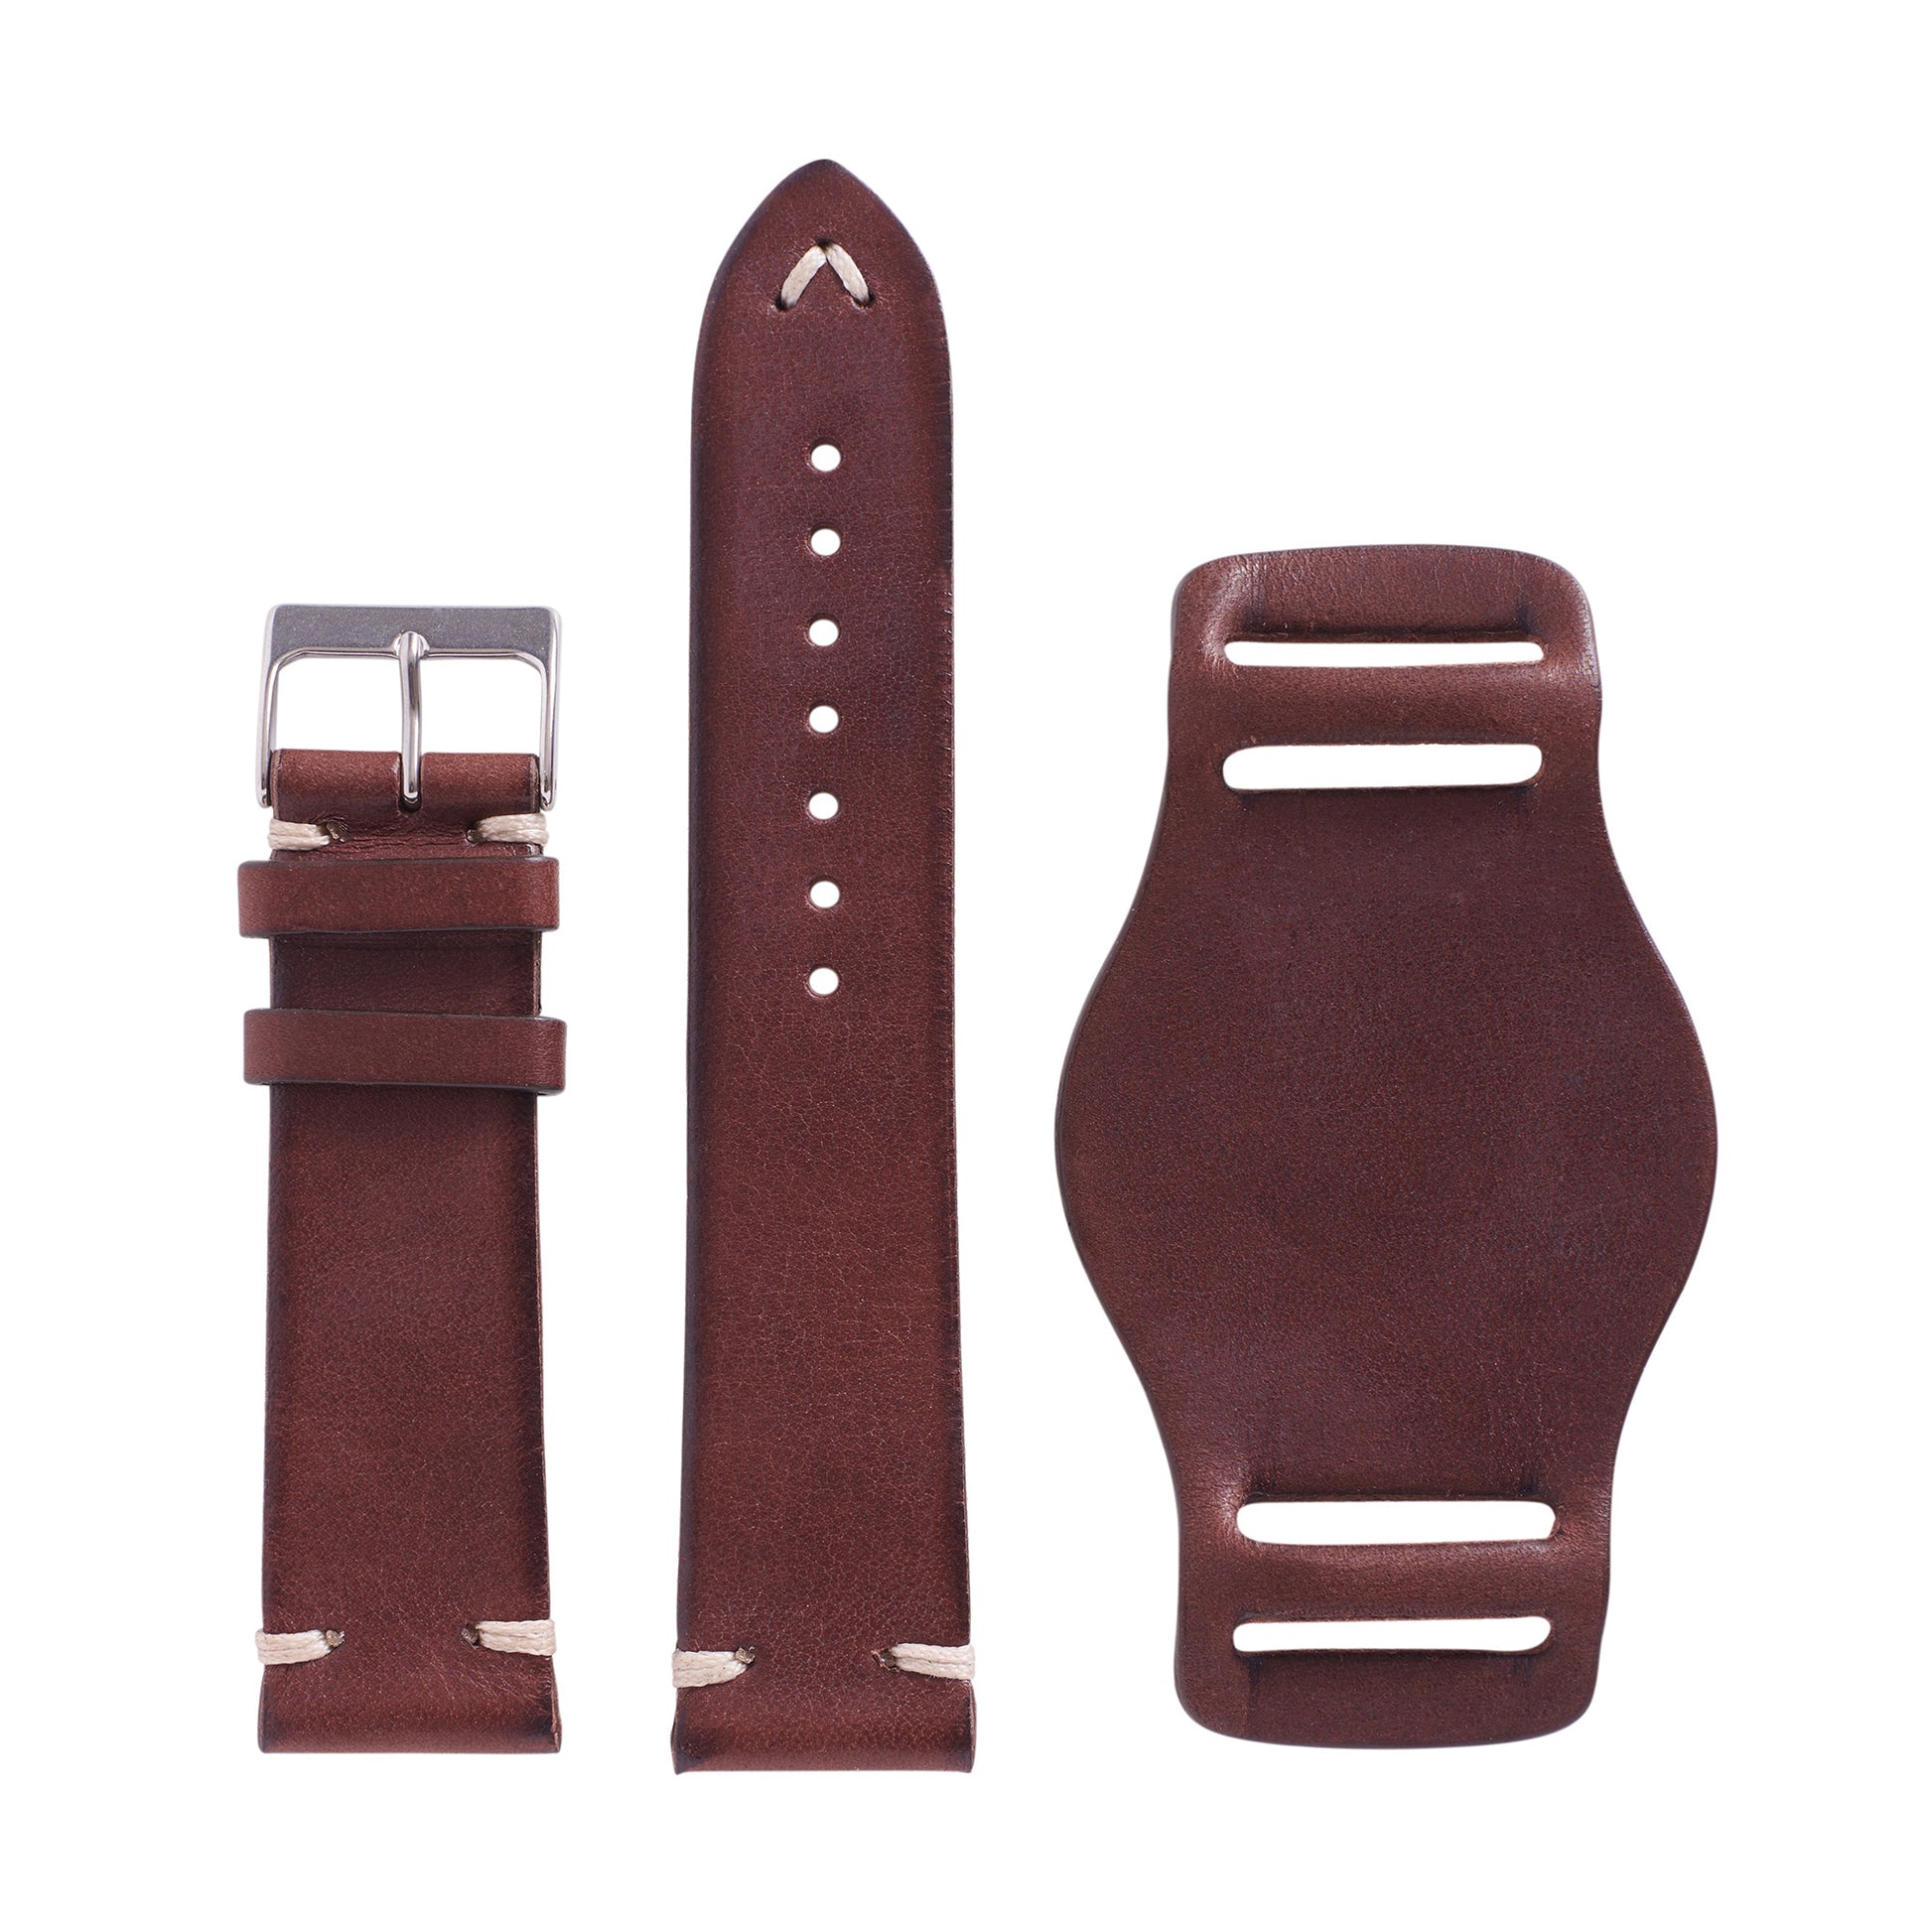 Italian leather watch strap with bund pad in vintage brown color by Jackson Wayne 